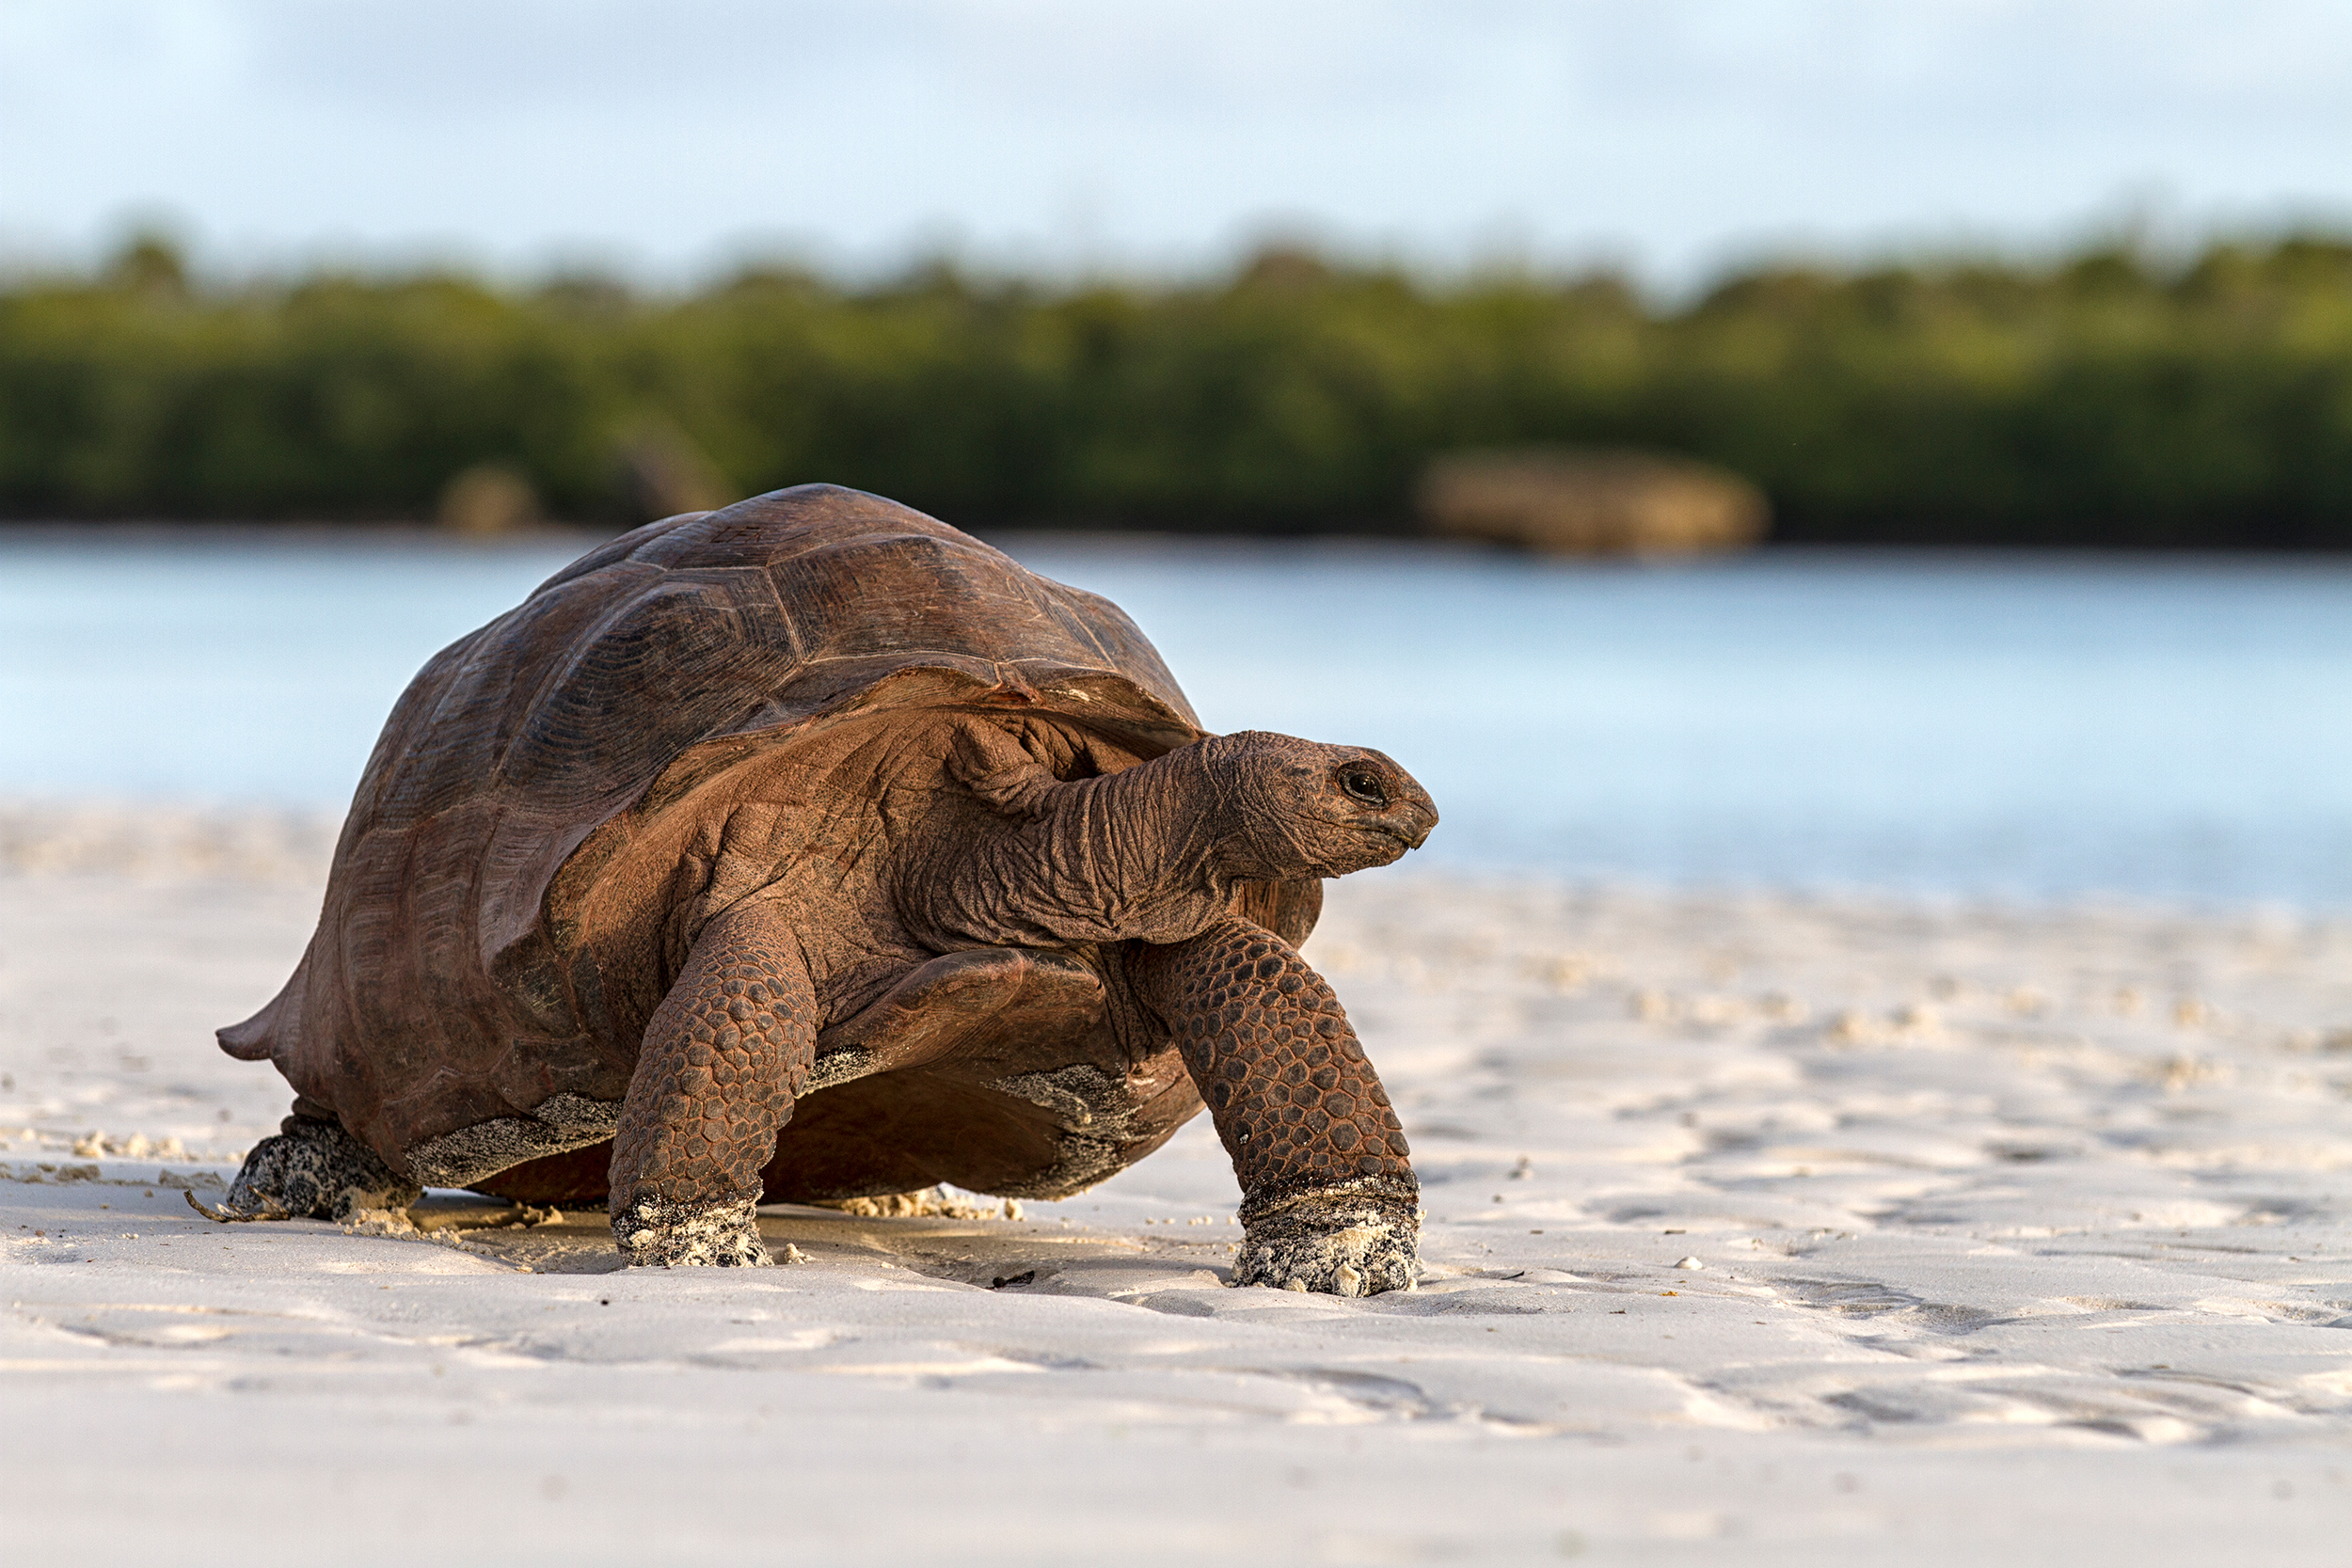 A Aldabra giant tortoise stands on a beach with a distant shoreline in the background.